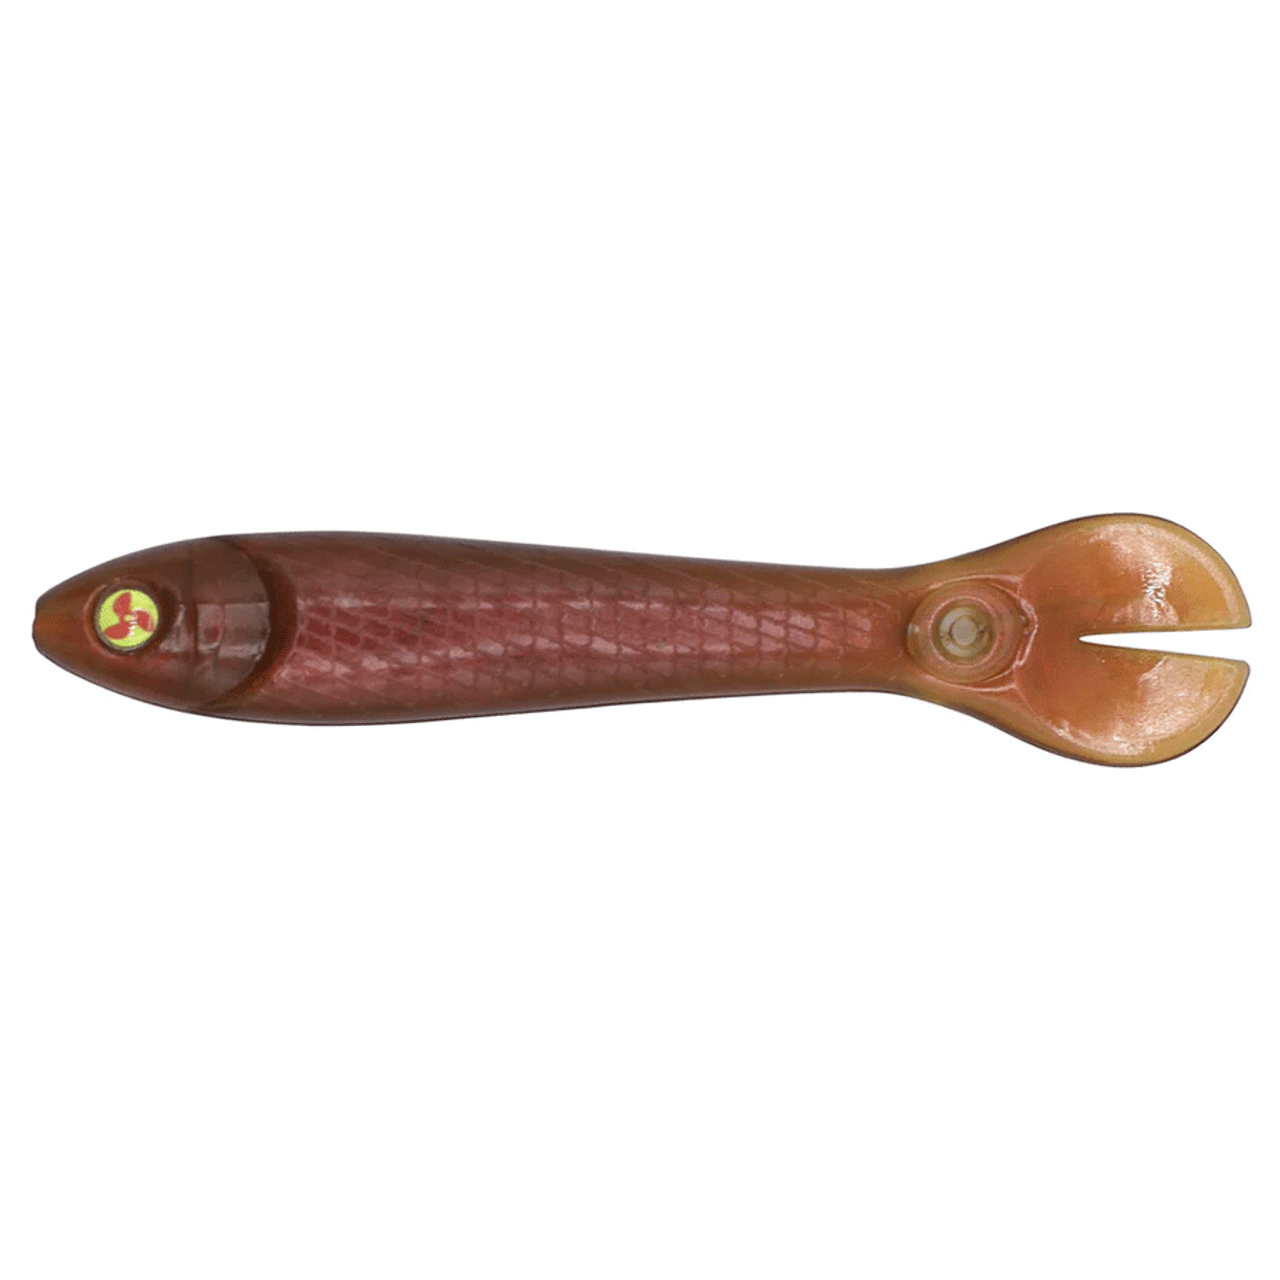 Lawless Lures 5.25 Recoil Minnow Bait